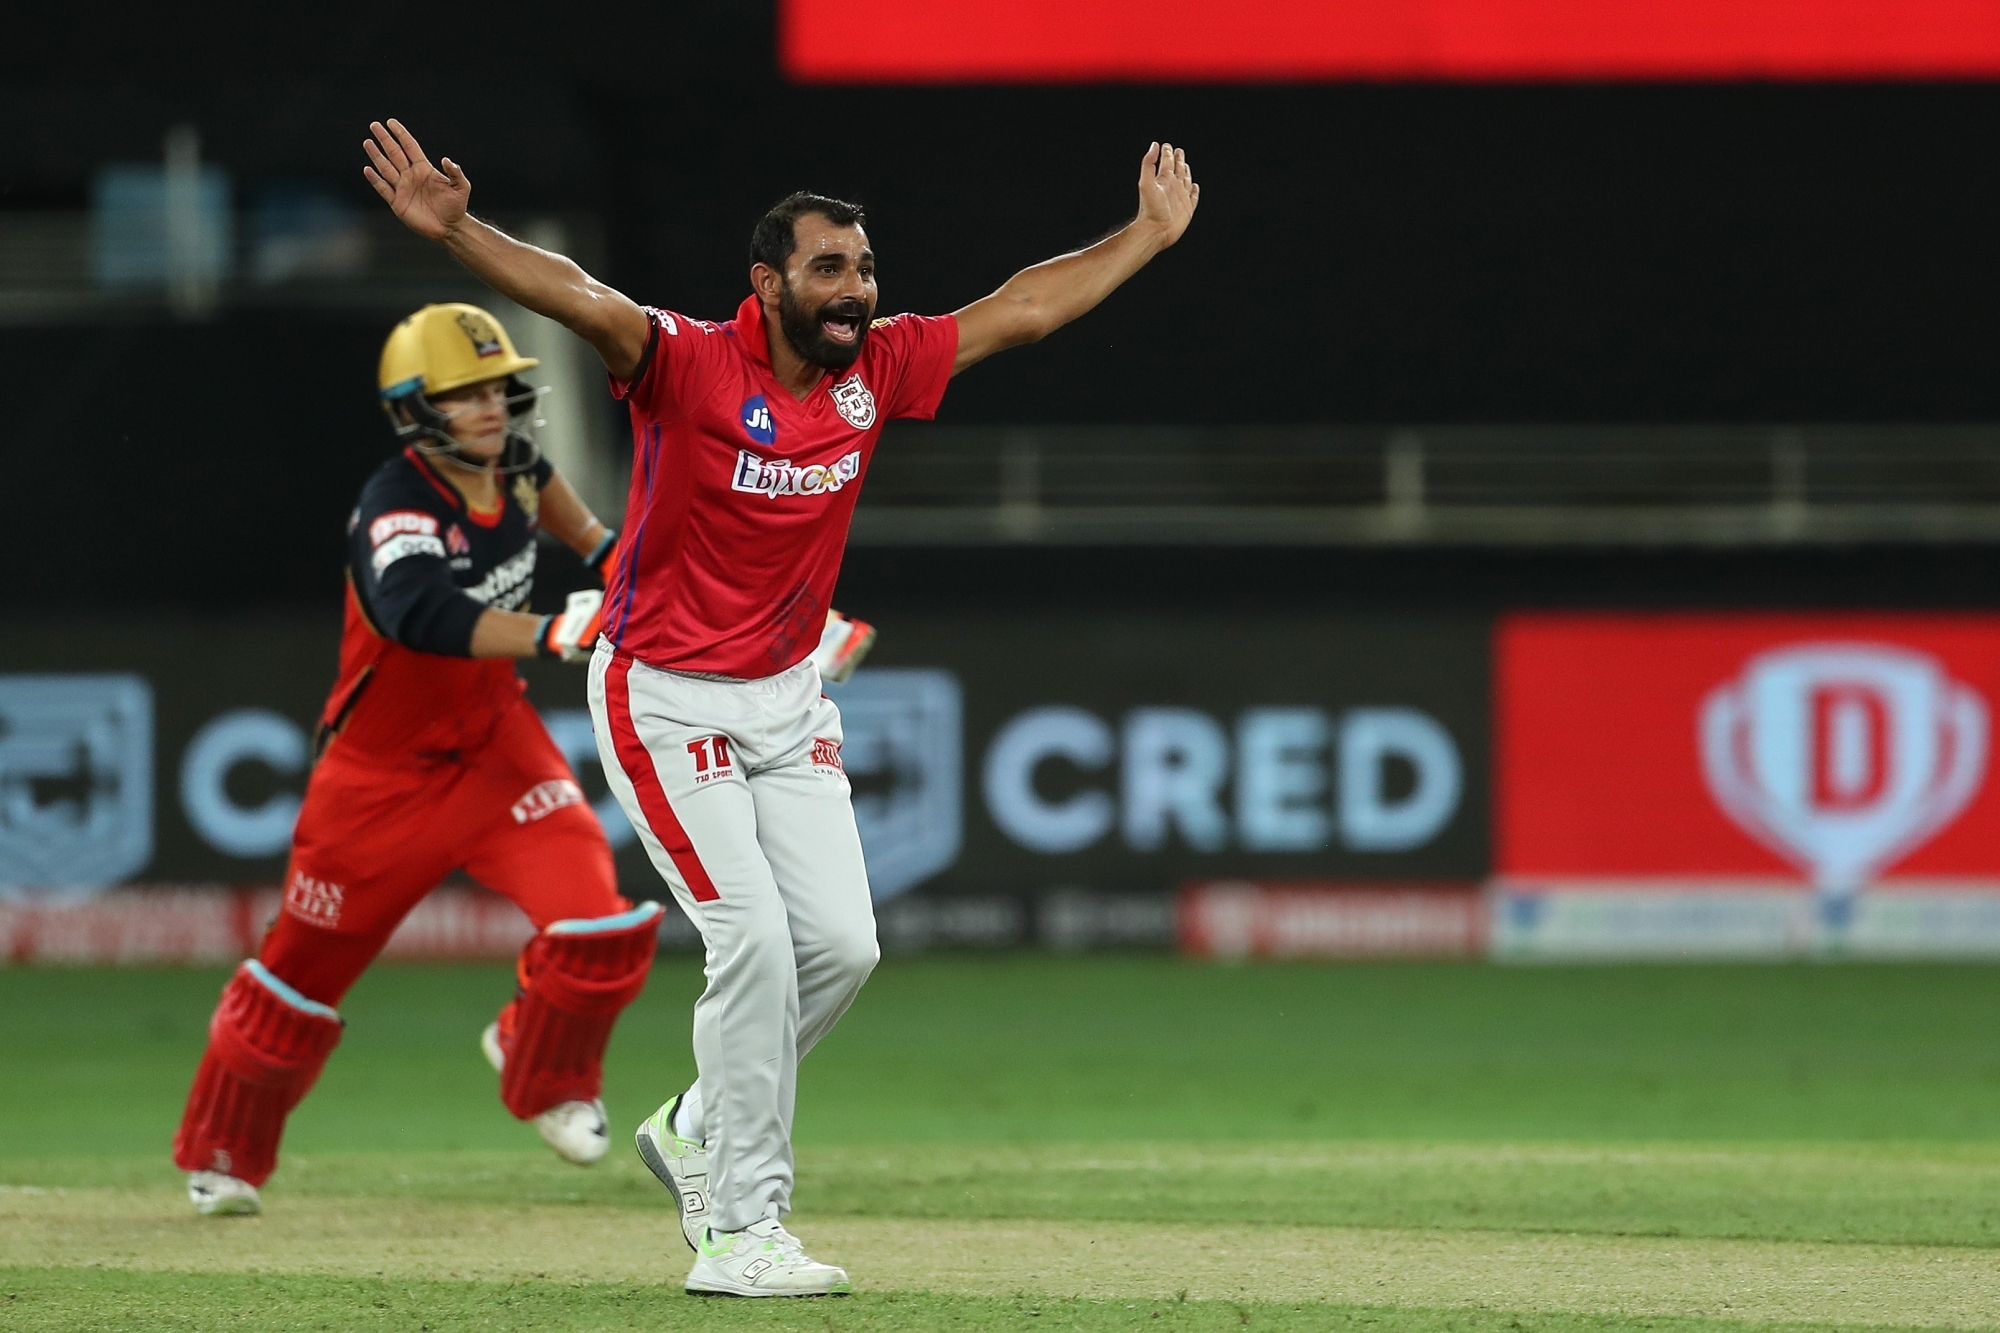 Mohammad Shami has shined brightly in otherwise gloomy KXIP team | Twitter